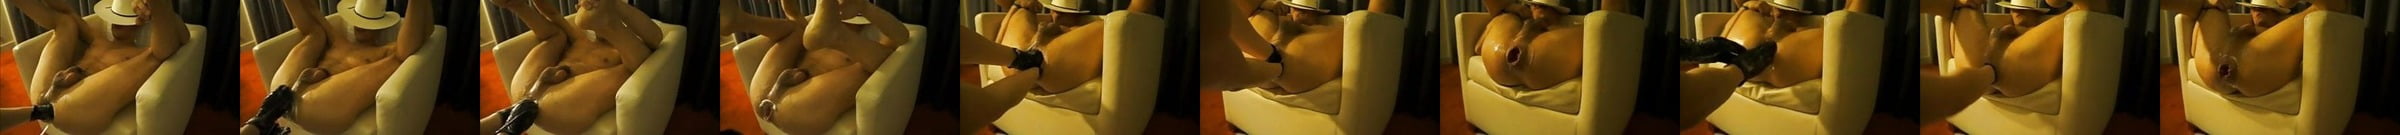 Late Night Stretching With Toys Gay Porn 27 XHamster XHamster